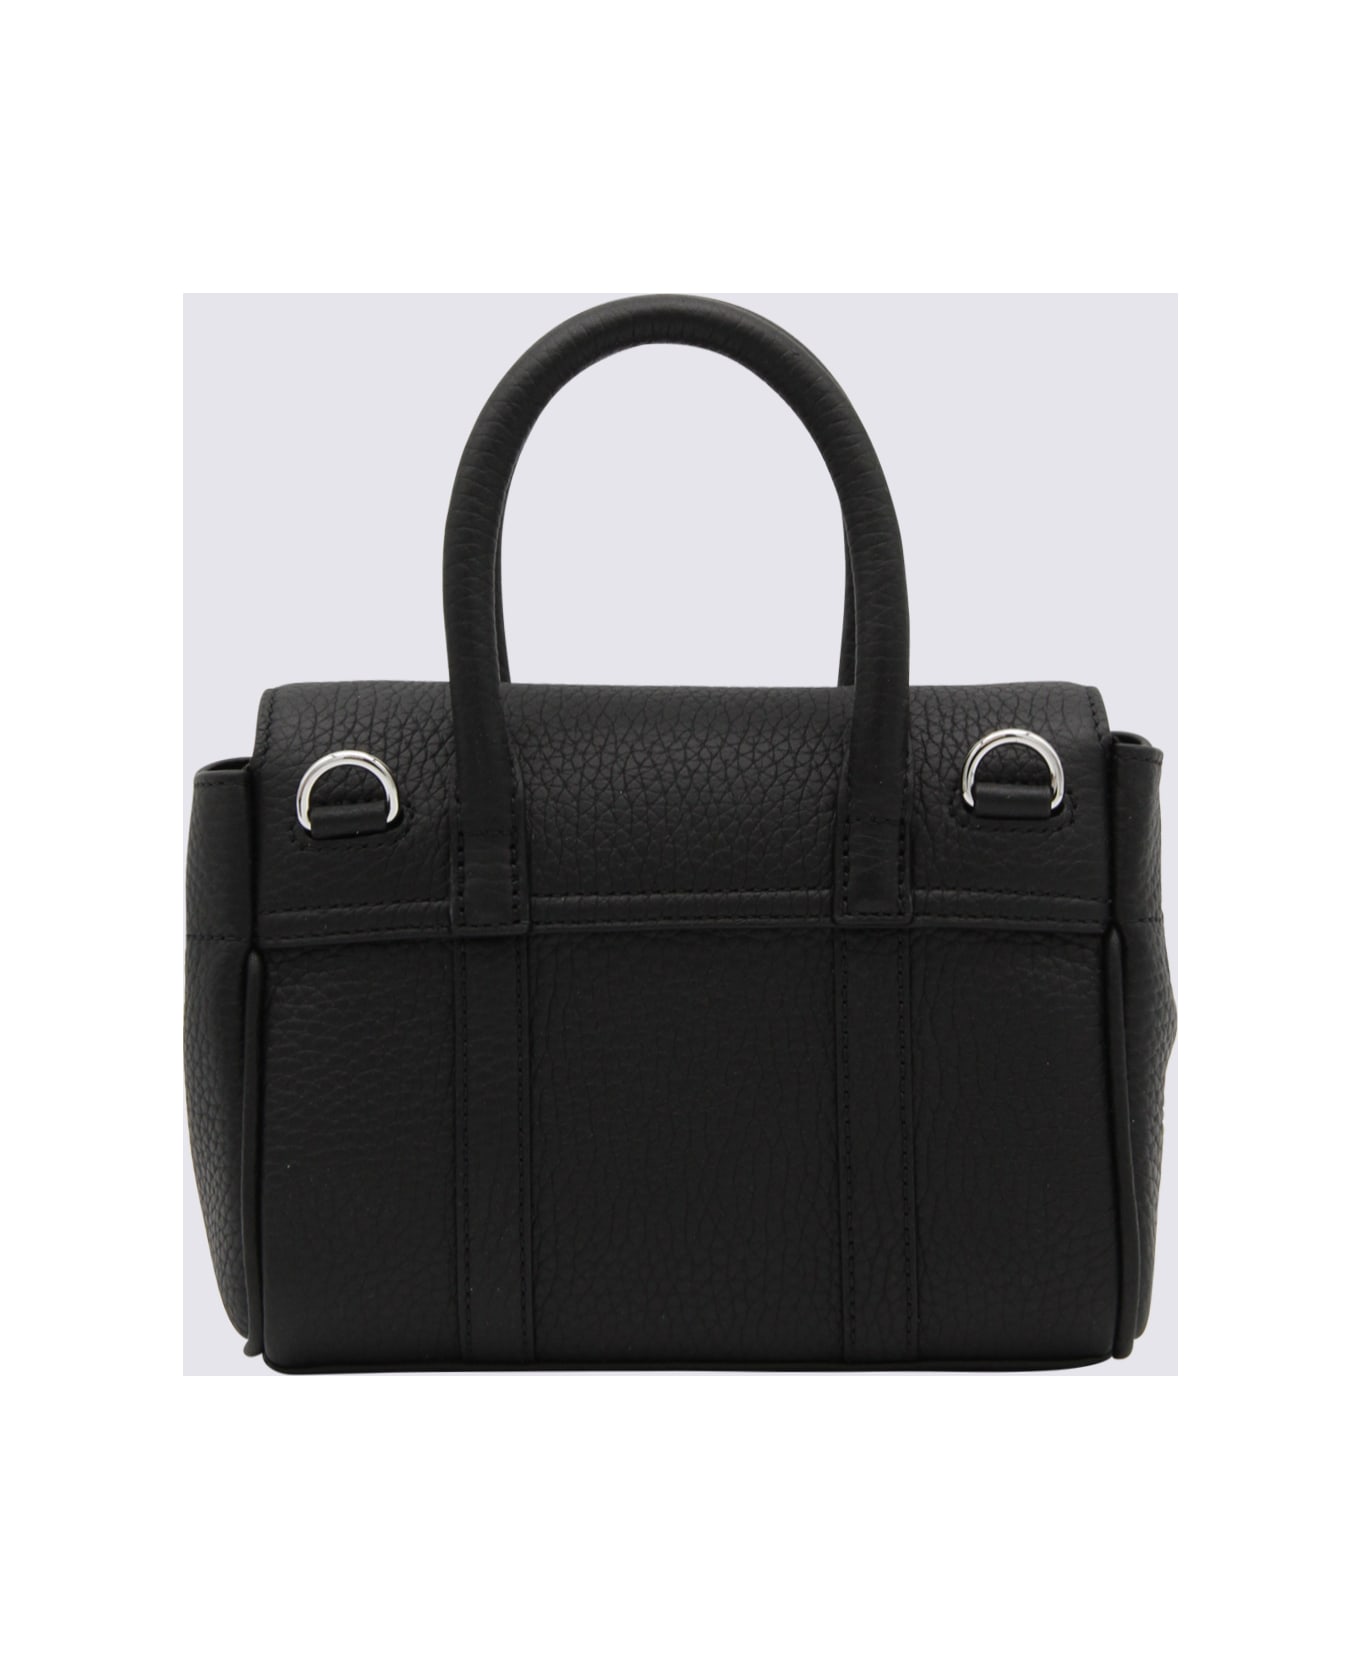 Mulberry Black Leather Mini Bayswater Heavy Top Handle Bag - Black